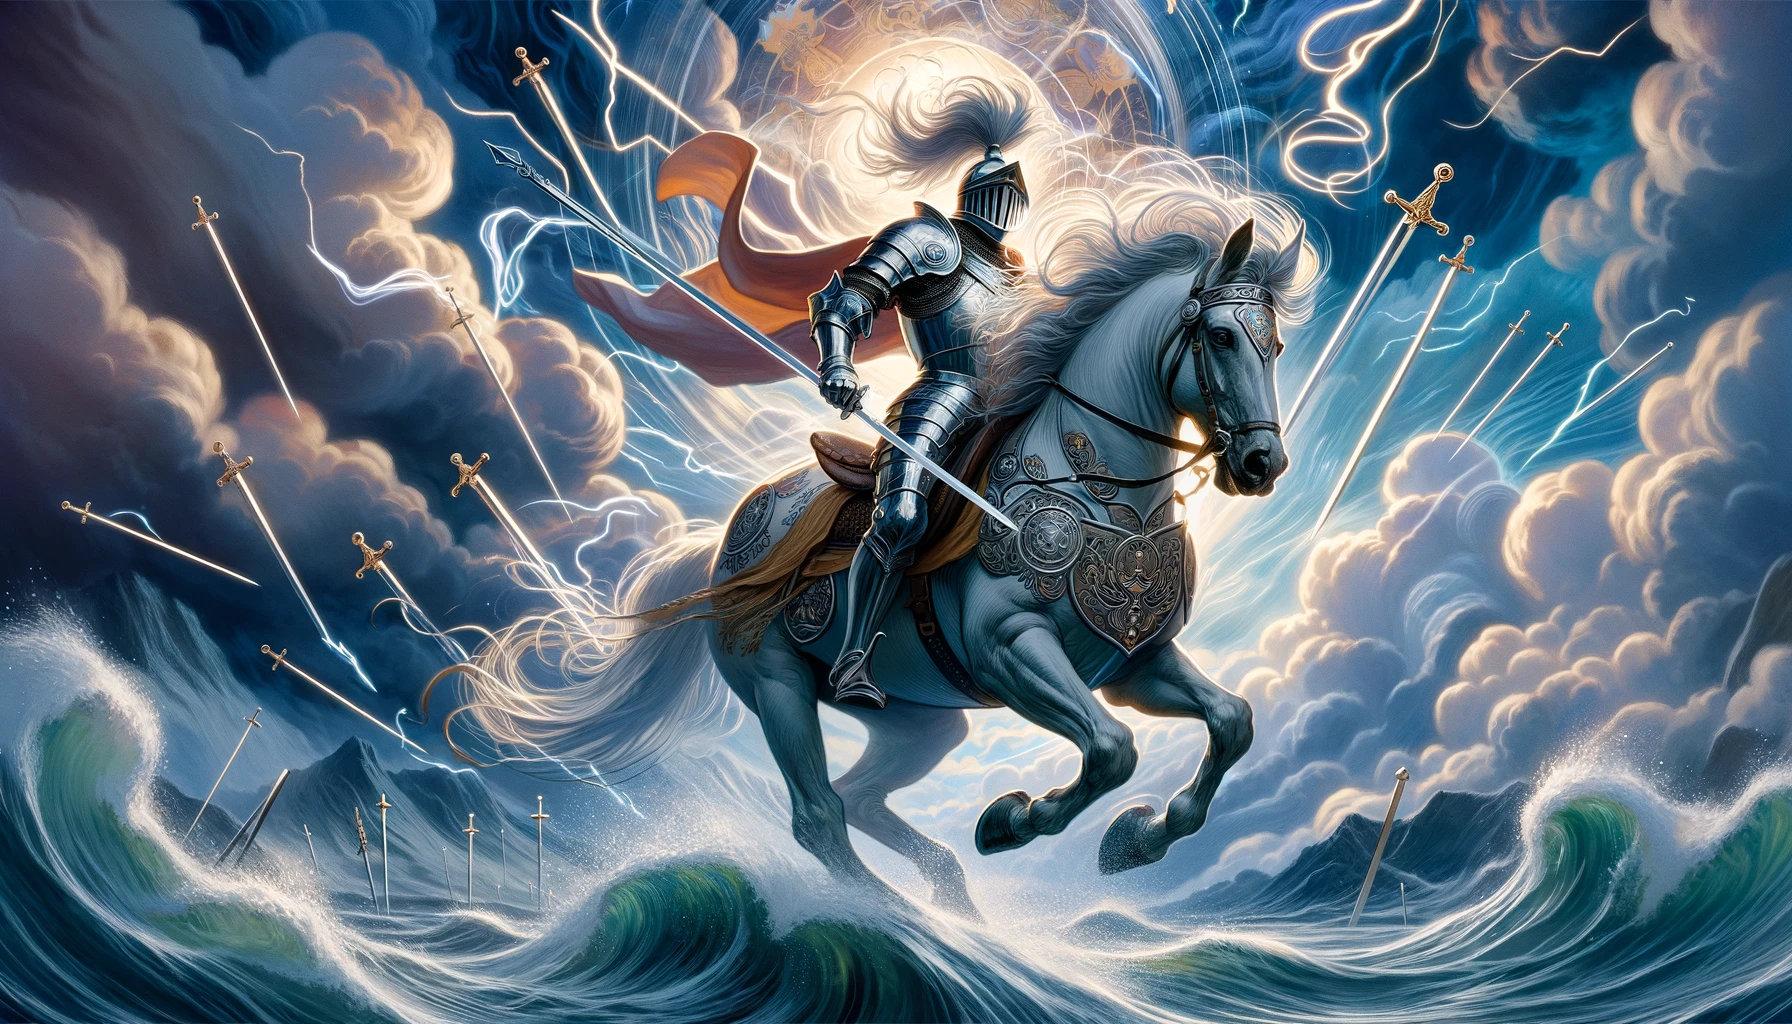 "Illustration capturing the intense emotions and dynamic energy of the Knight of Swords, depicting swift movement against a tumultuous emotional backdrop. This visual enhances the article by conveying the card's complex interplay of intellect and emotion in tarot readings."